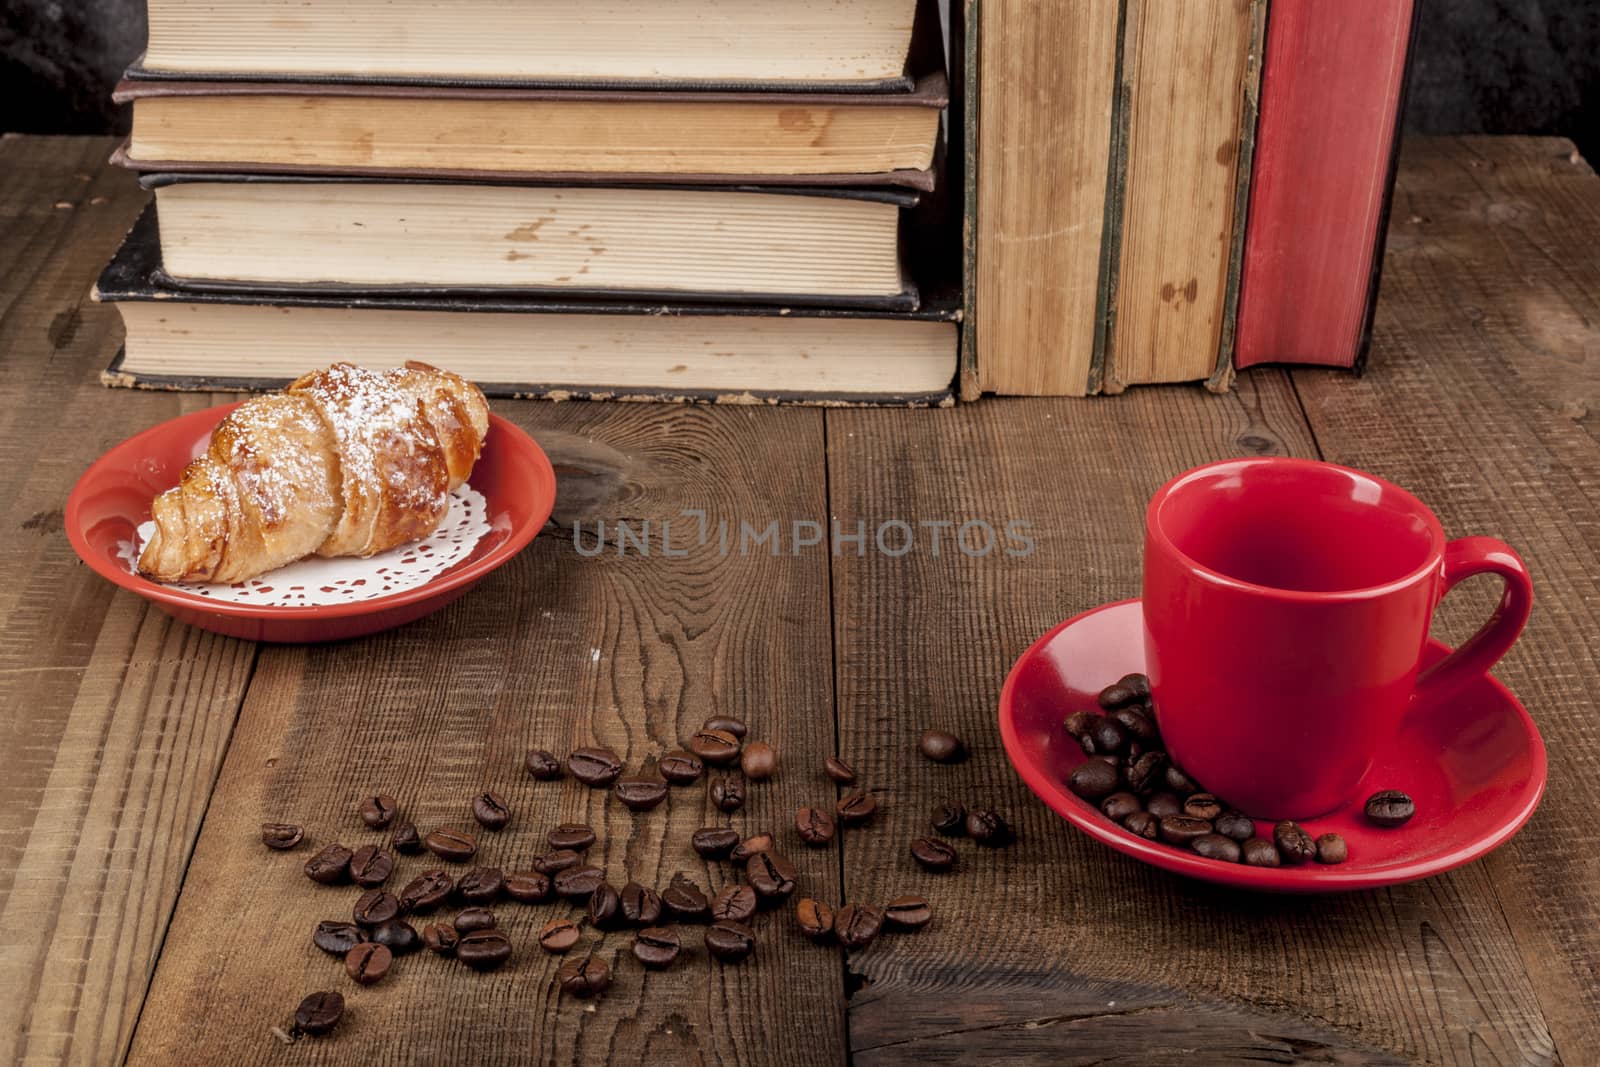 Morning Croissant and coffee with some books